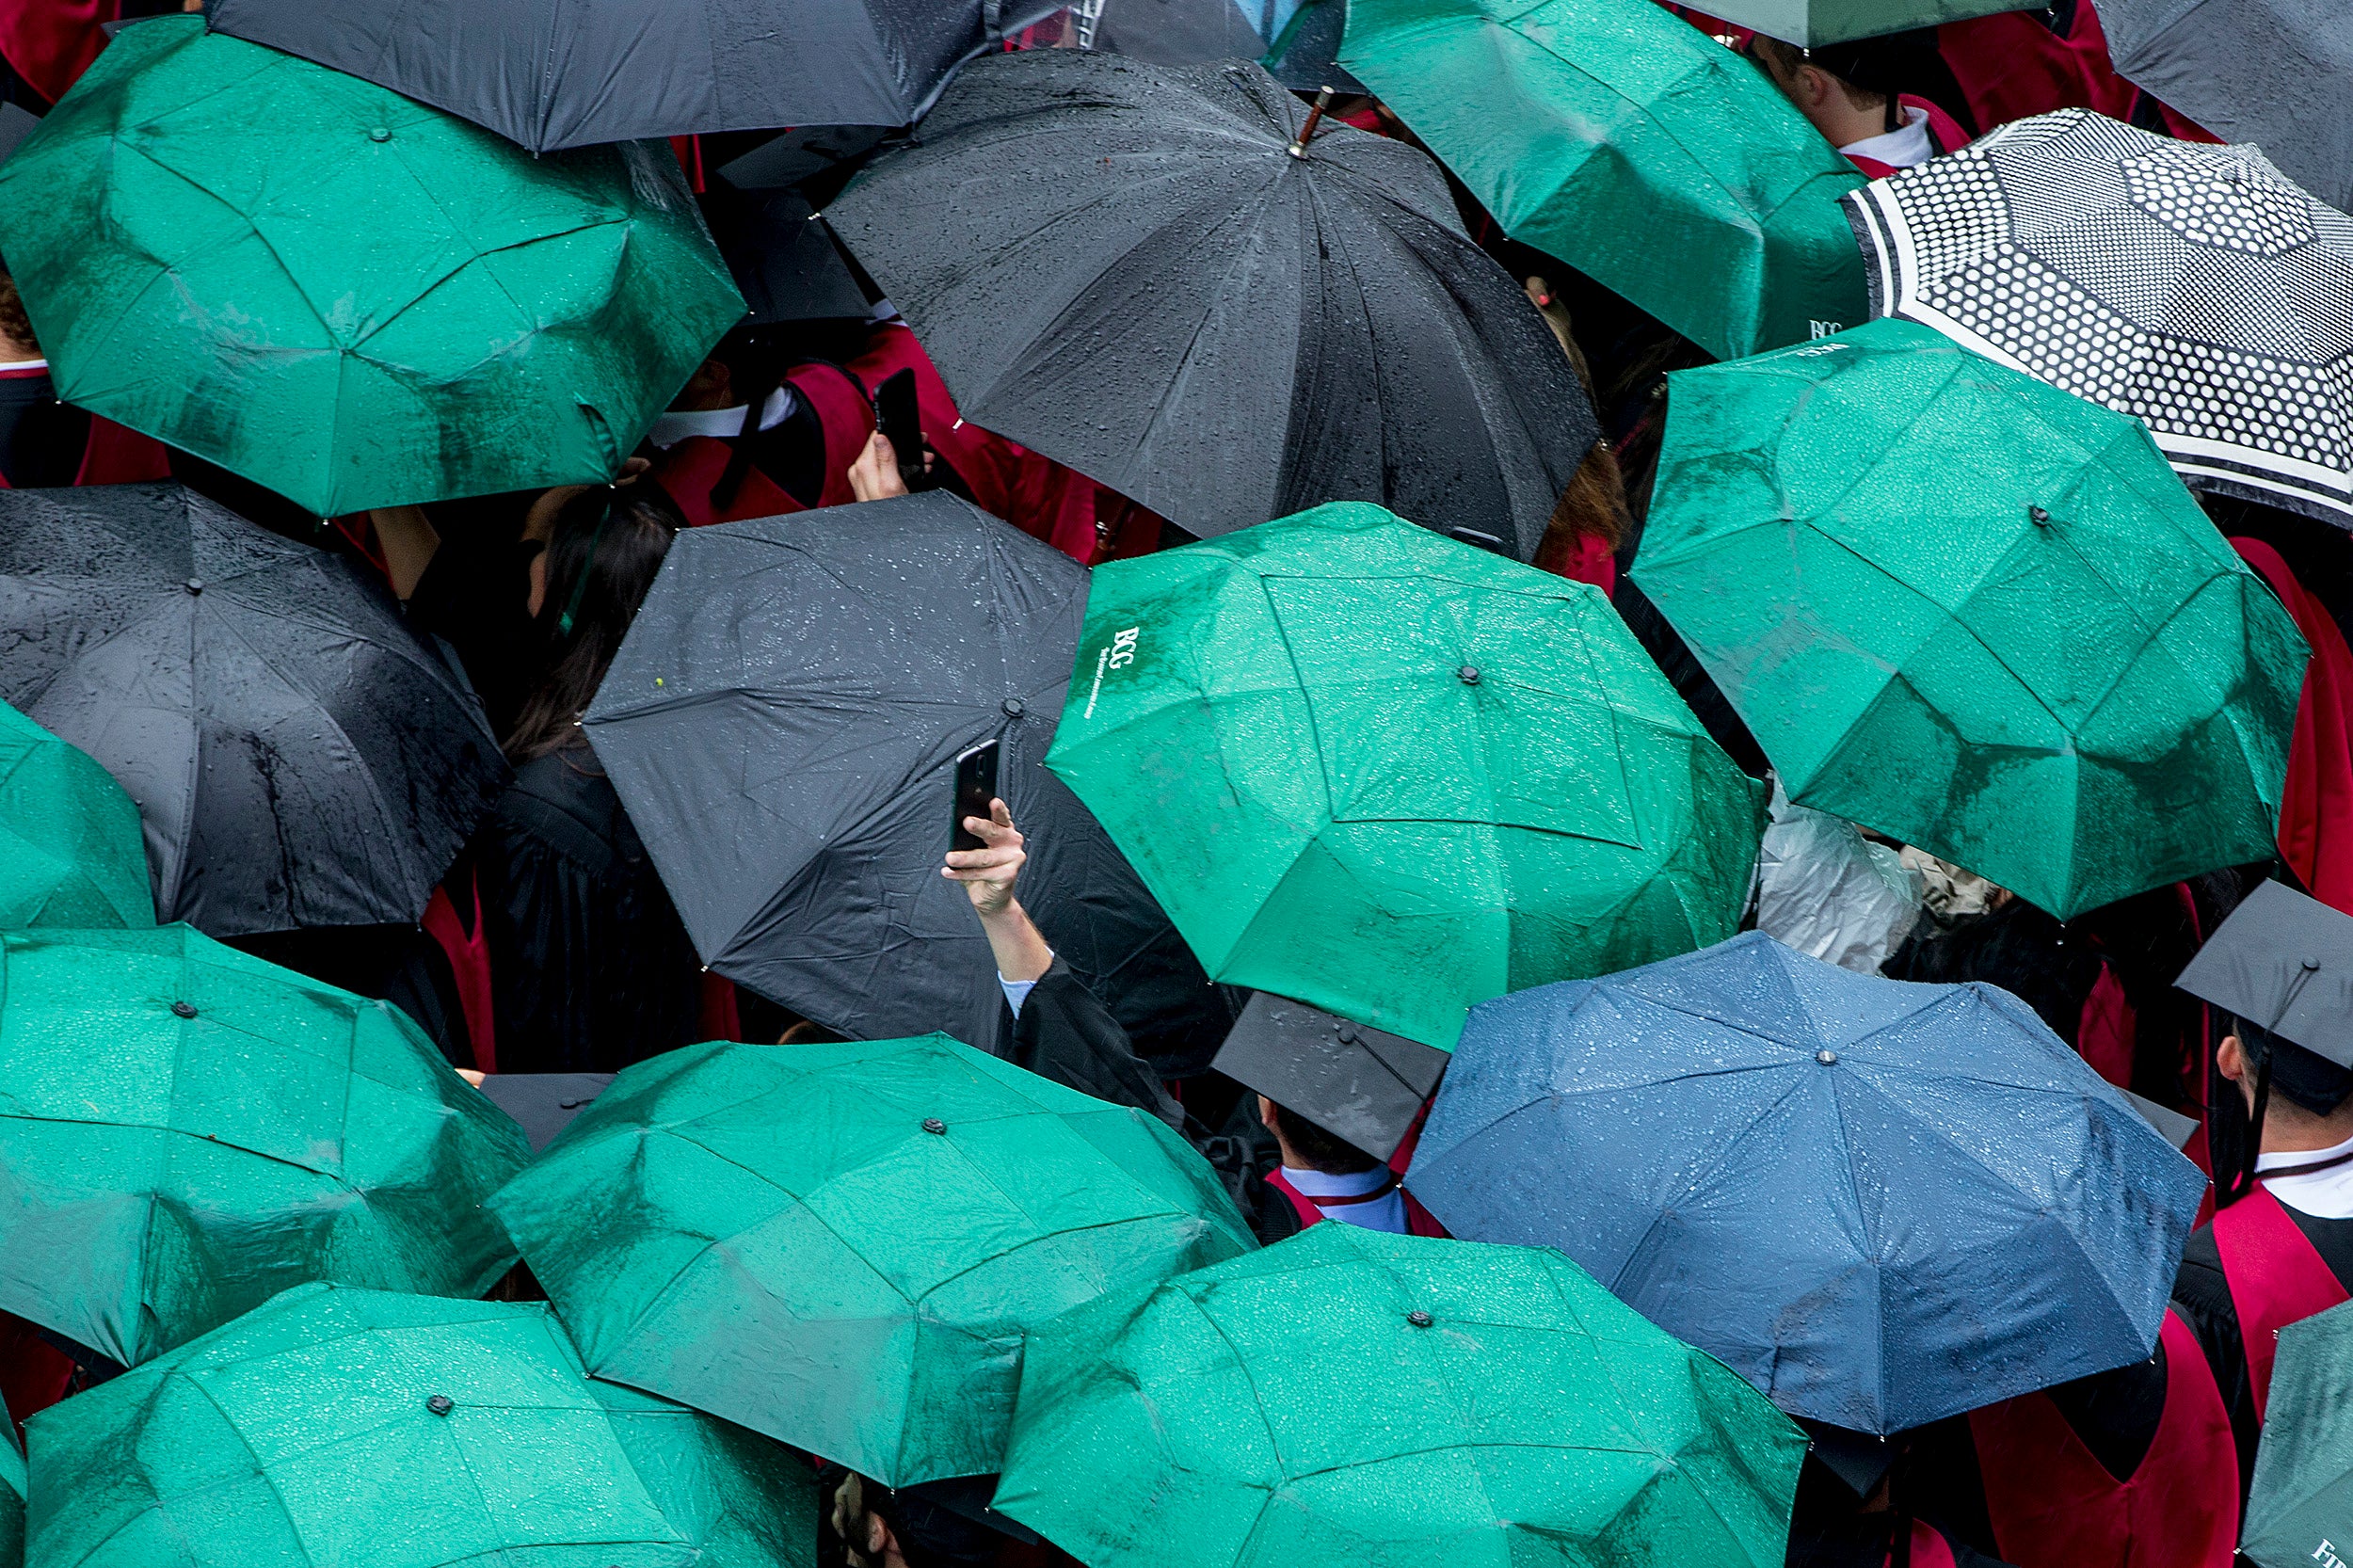 A Harvard graduate raises his phone to snap a picture above the umbrellas.